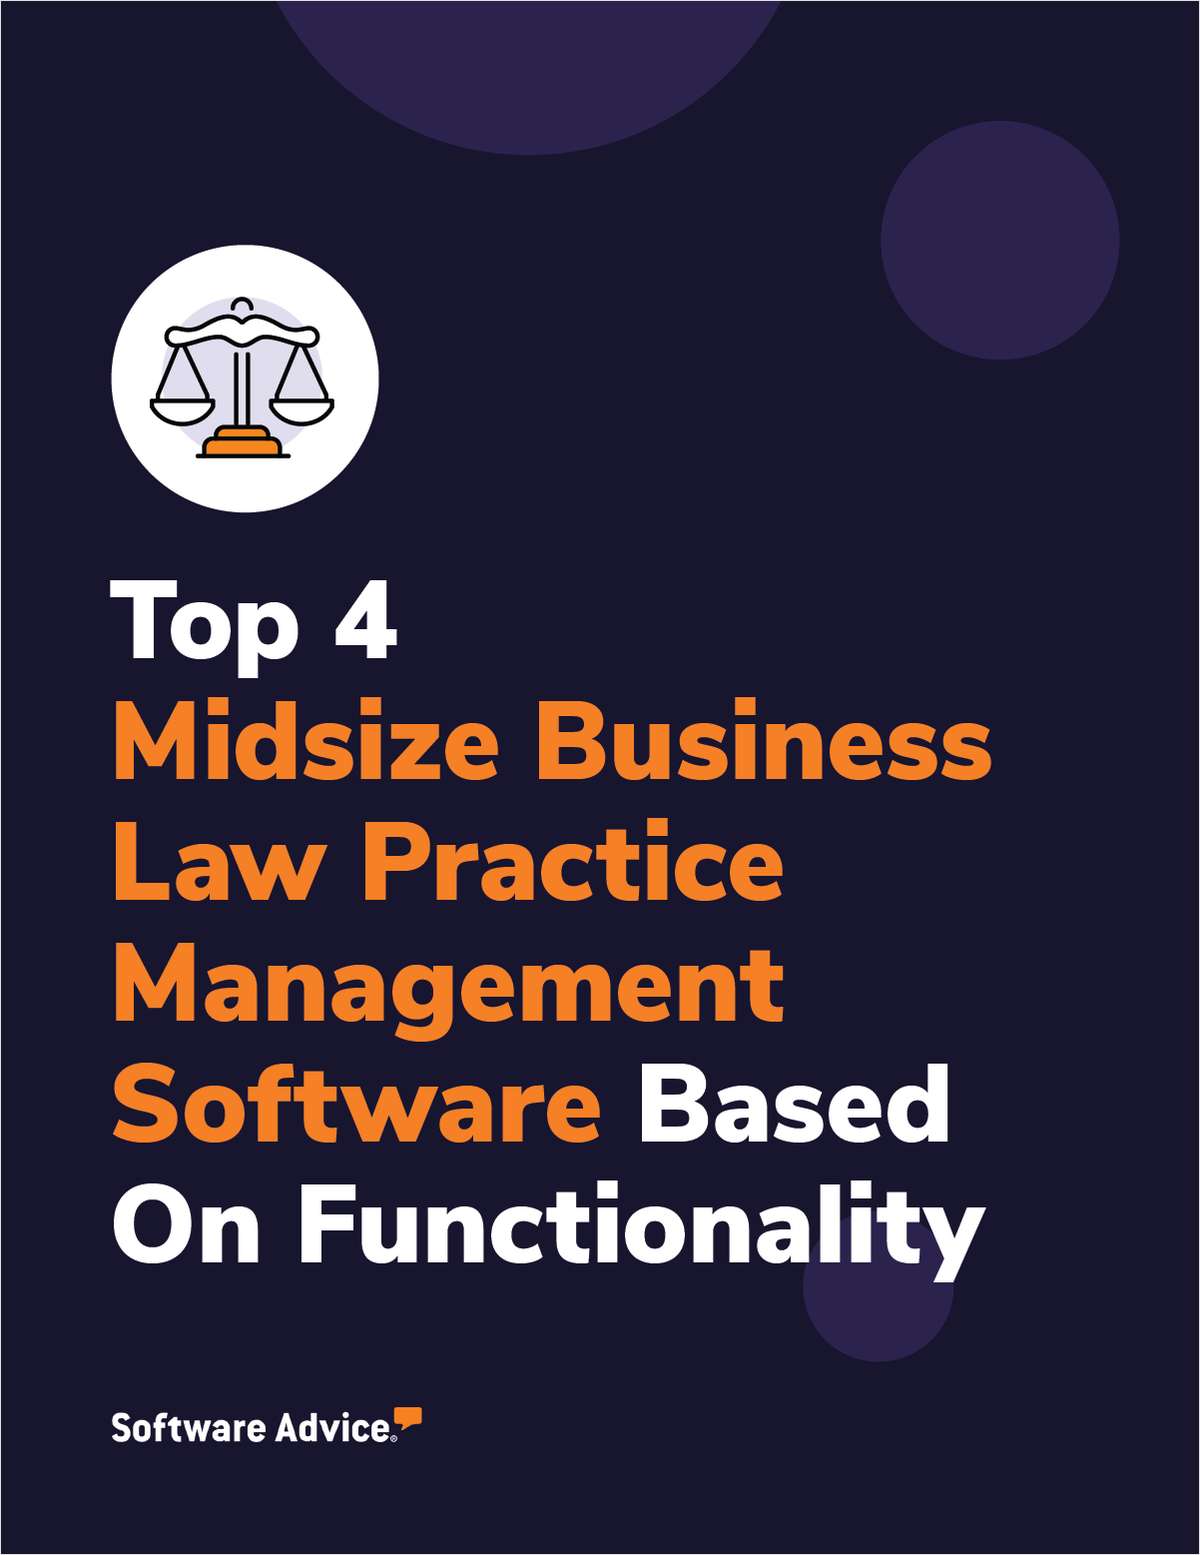 Top 4 Midsize Business Law Practice Management Software With the Best User Reviewed Functionality